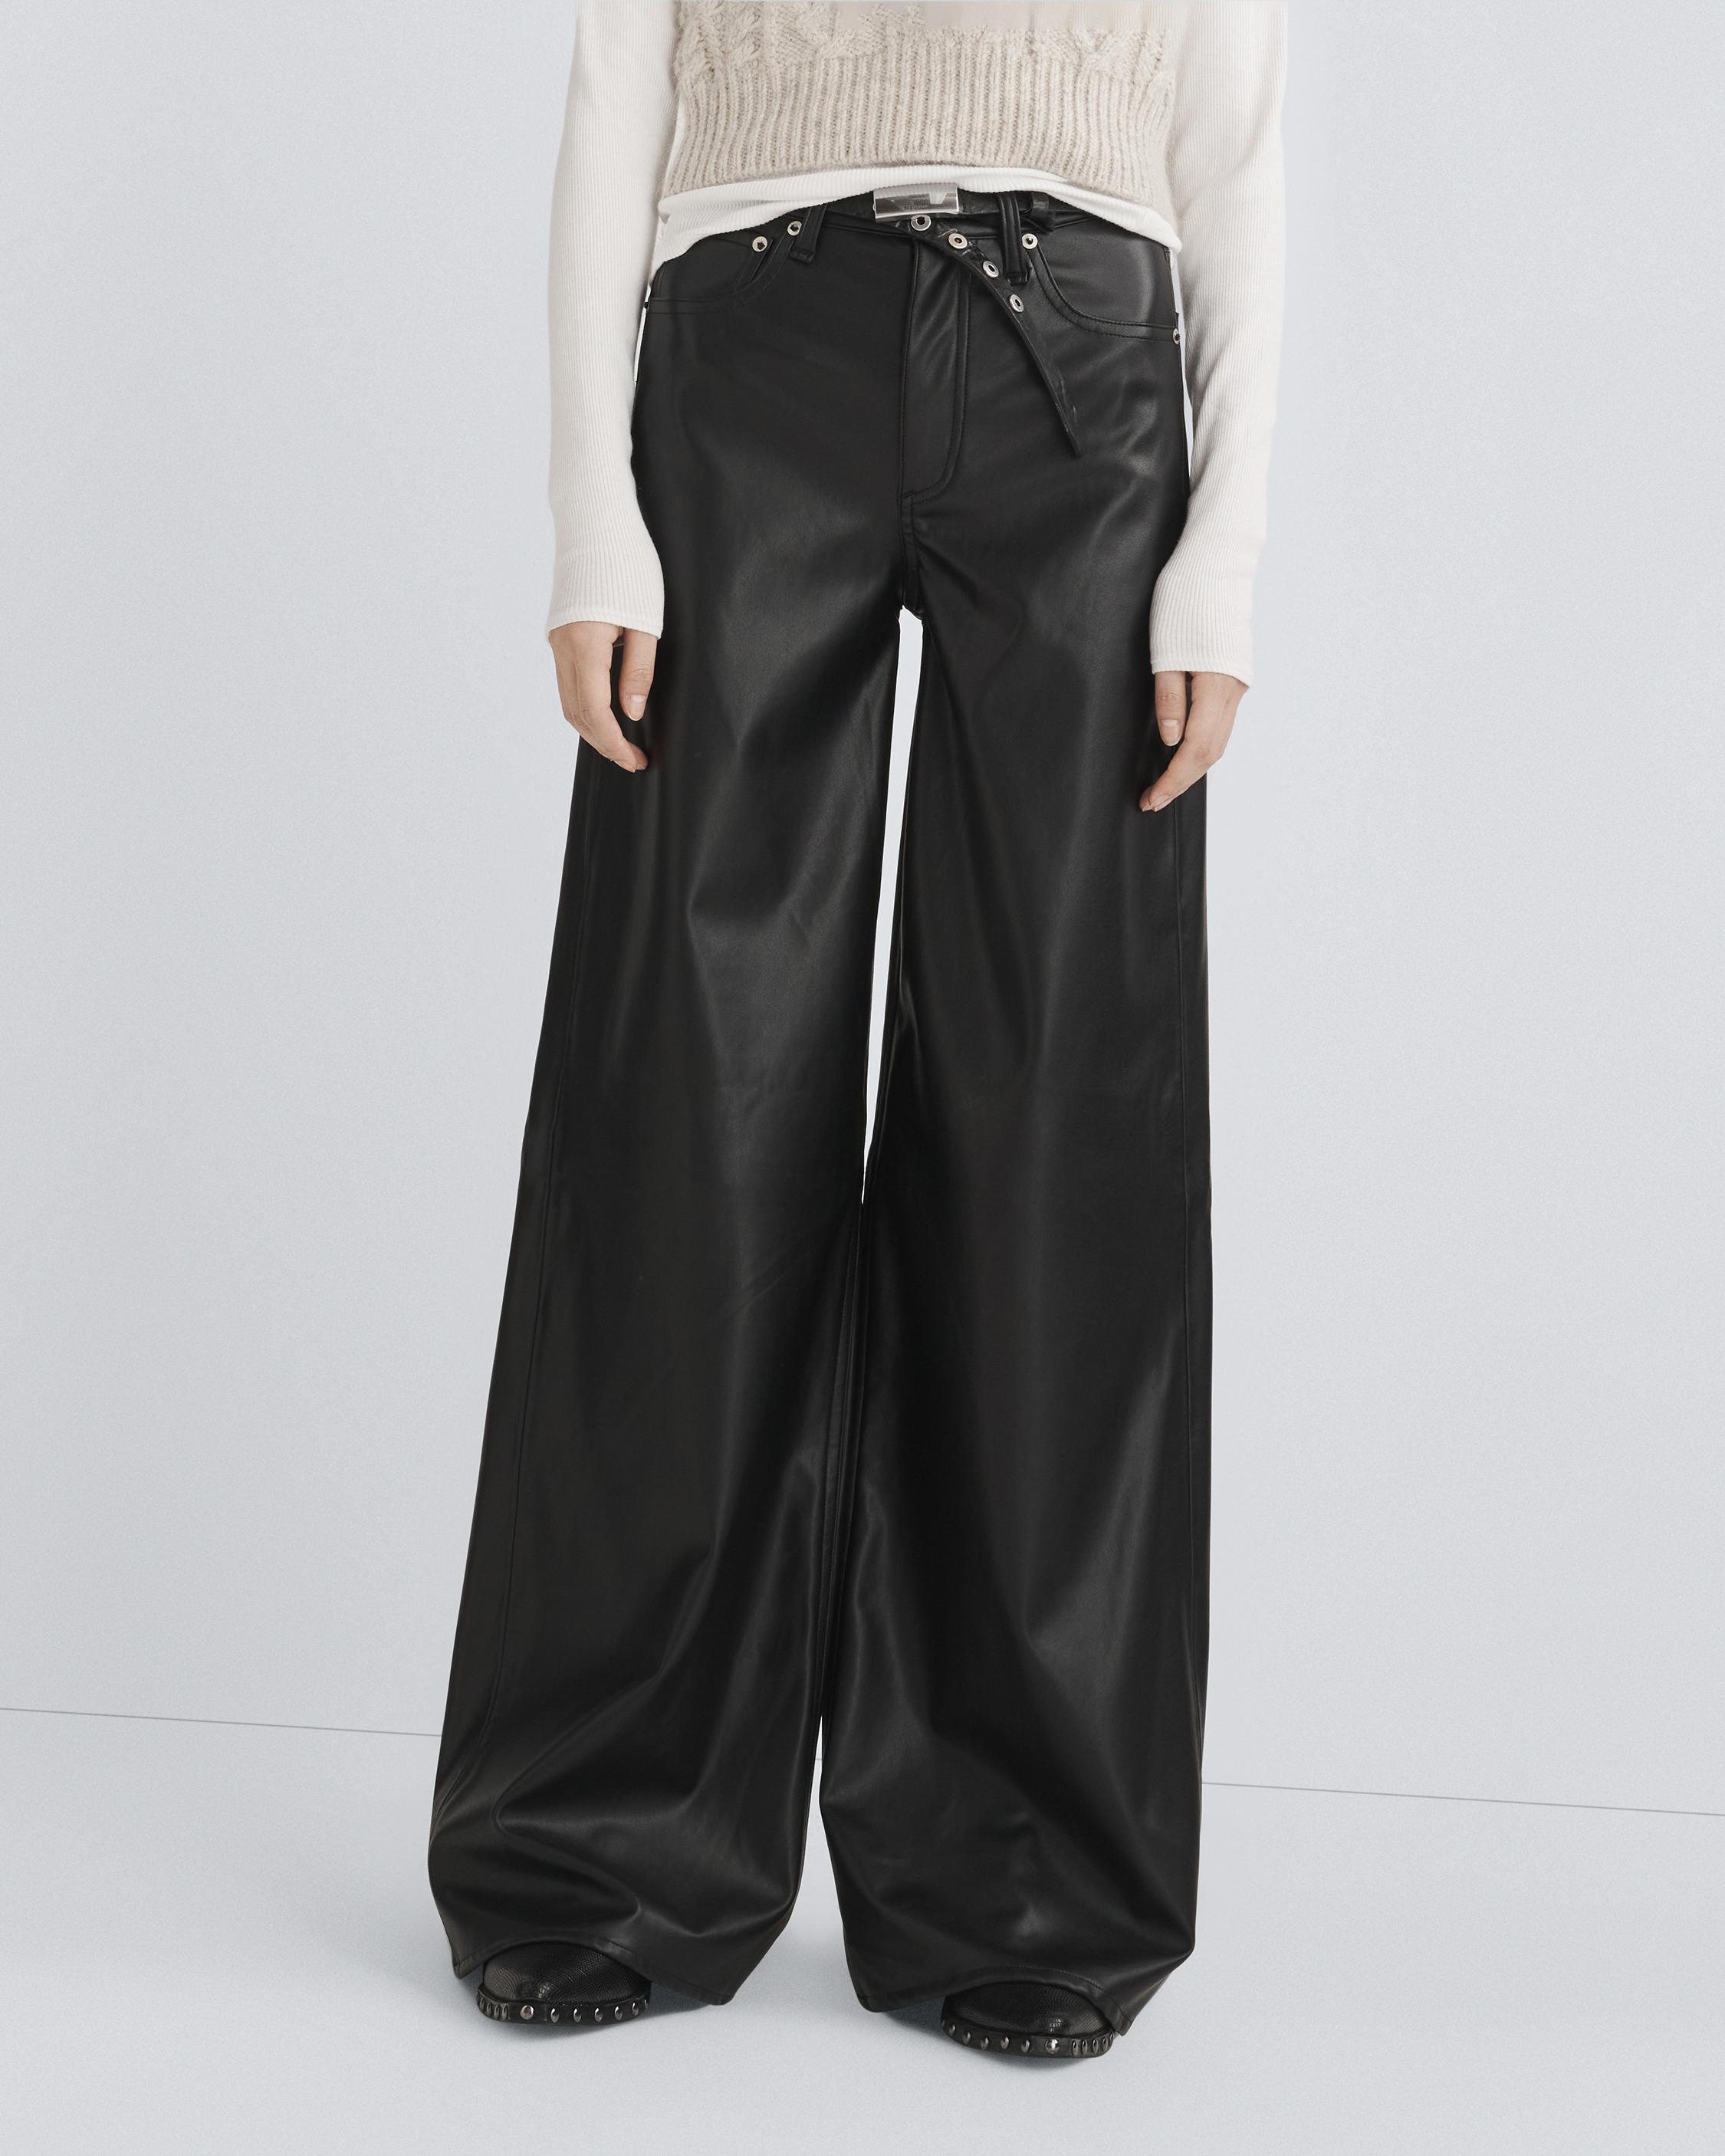 Faux Leather Wide Leg Trousers by Sosandar Online, THE ICONIC